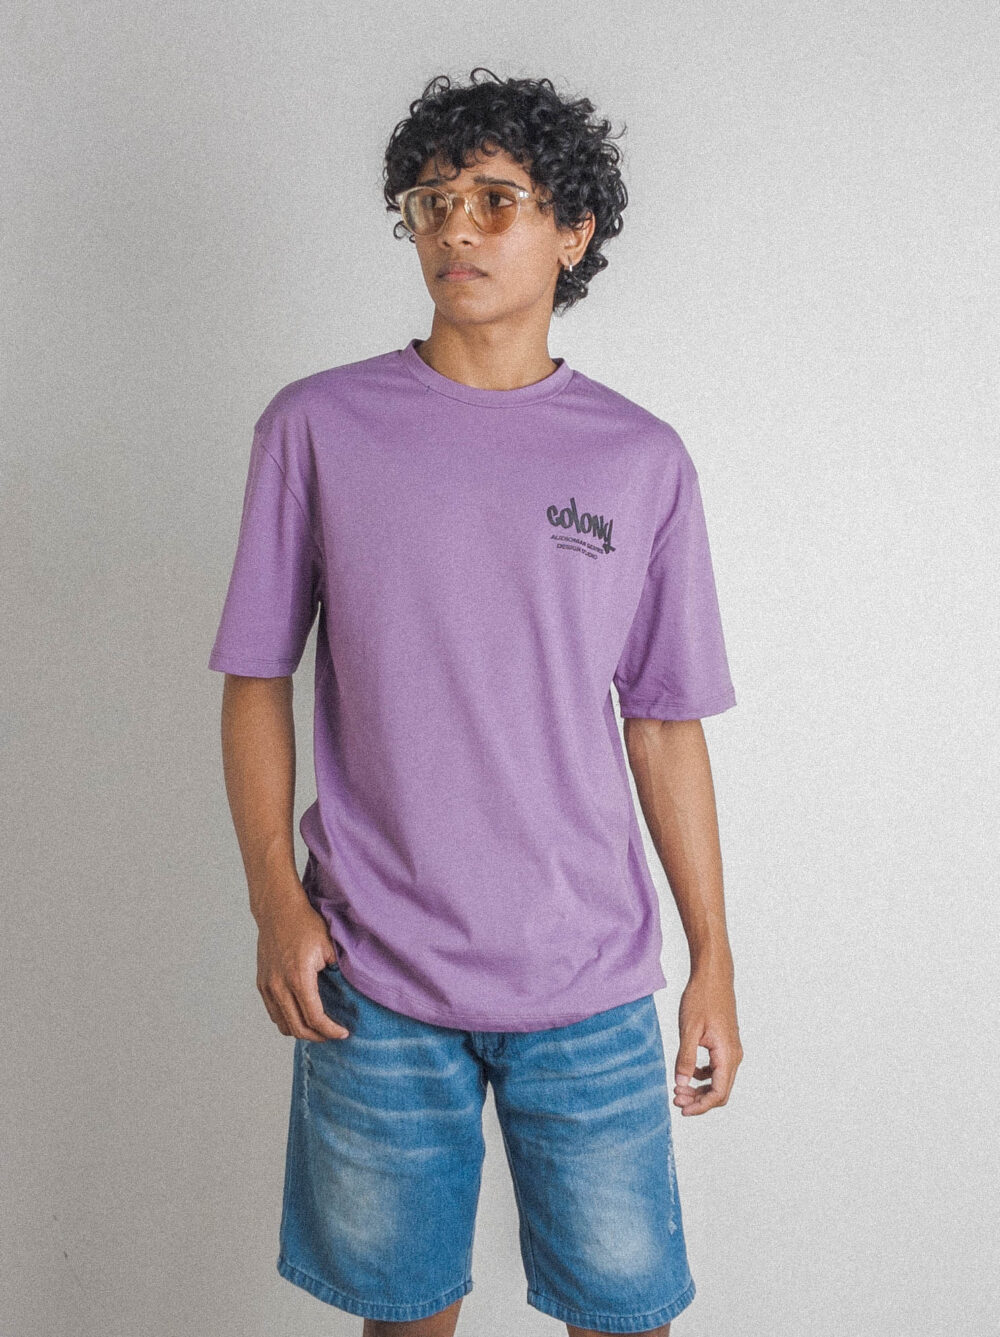 Oversized Graphic Tee Trance Mission in Purple Front